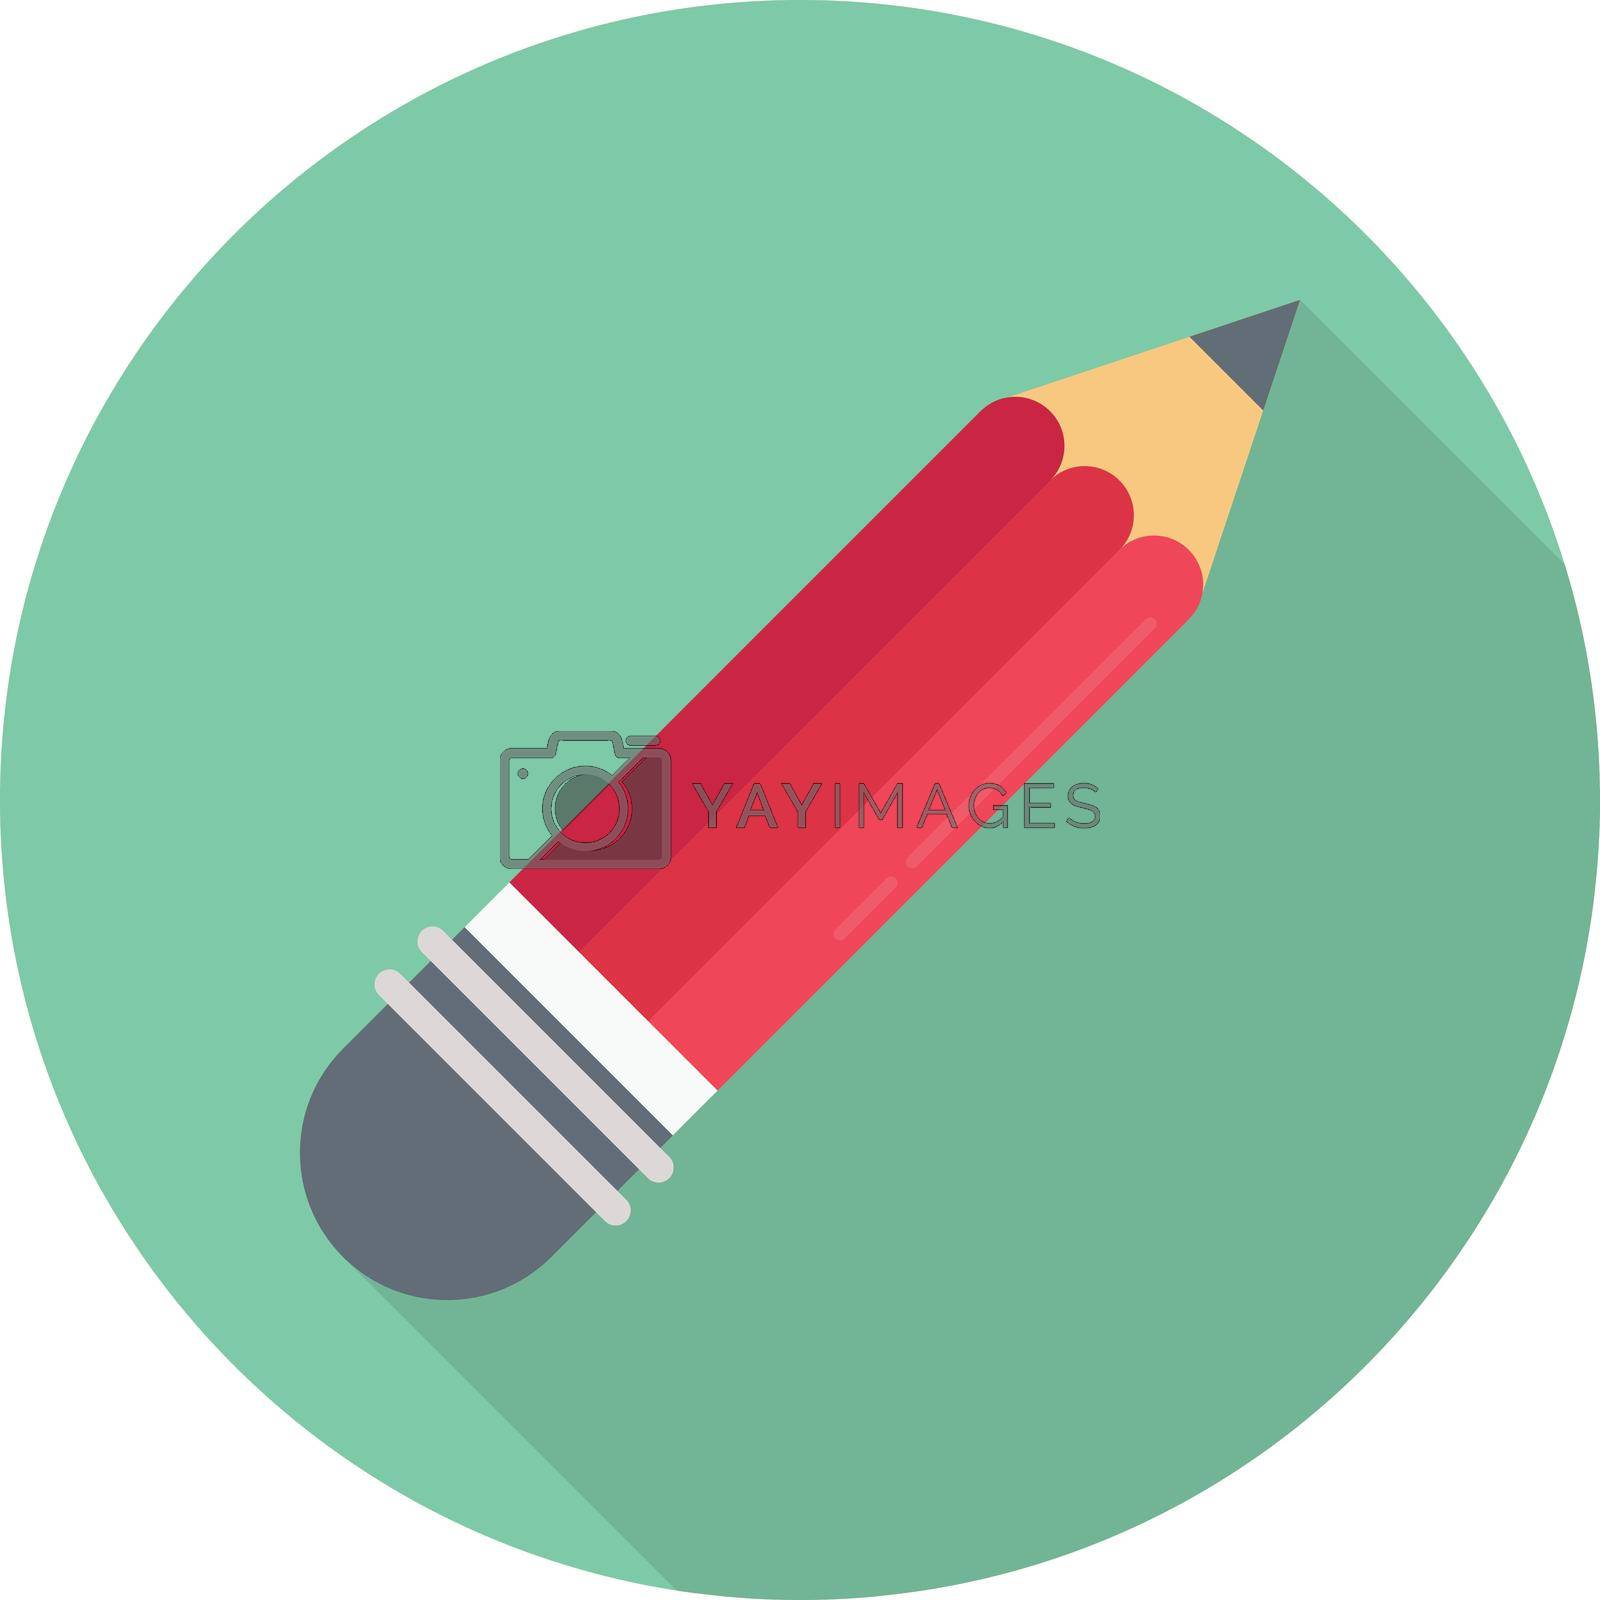 Royalty free image of pencil by vectorstall